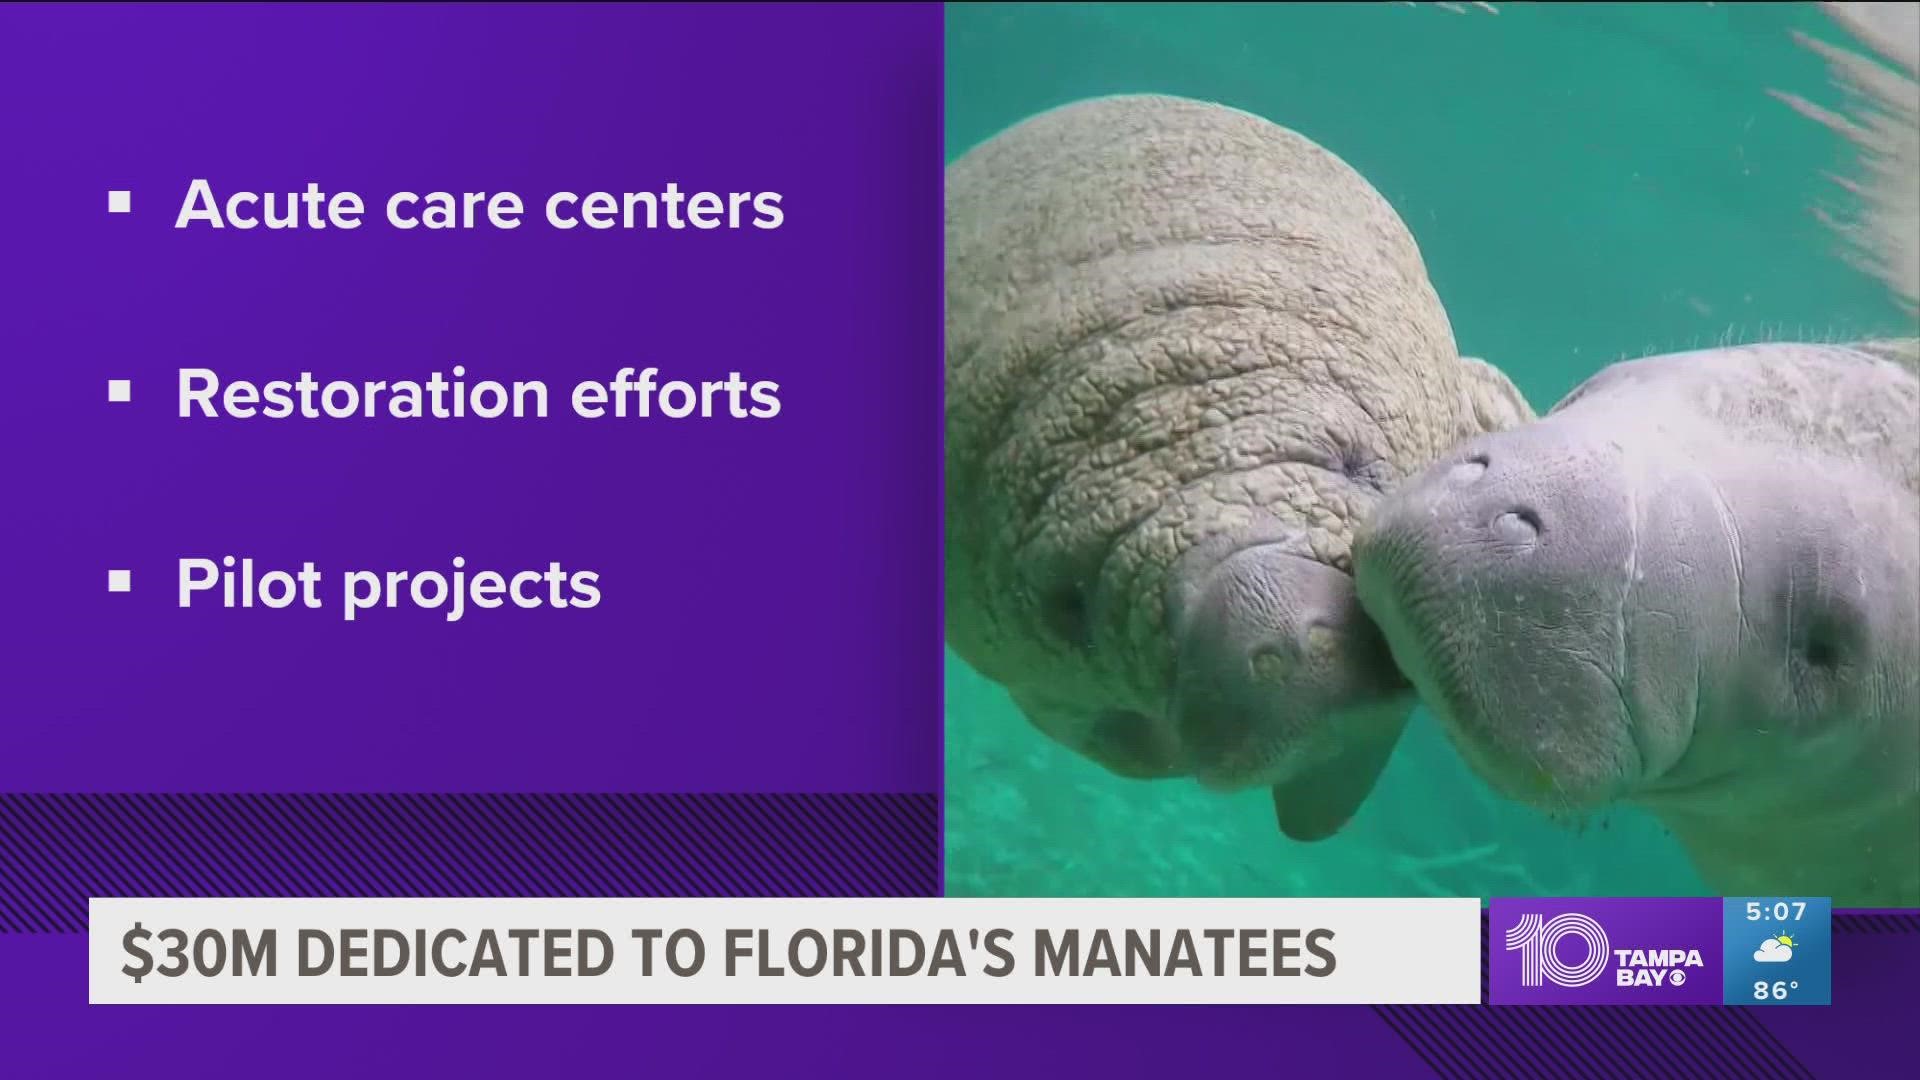 Gov. Ron DeSantis announced at a press conference at the Jacksonville Zoo & Gardens that the state will put money toward saving manatees and cleaning up waterways.